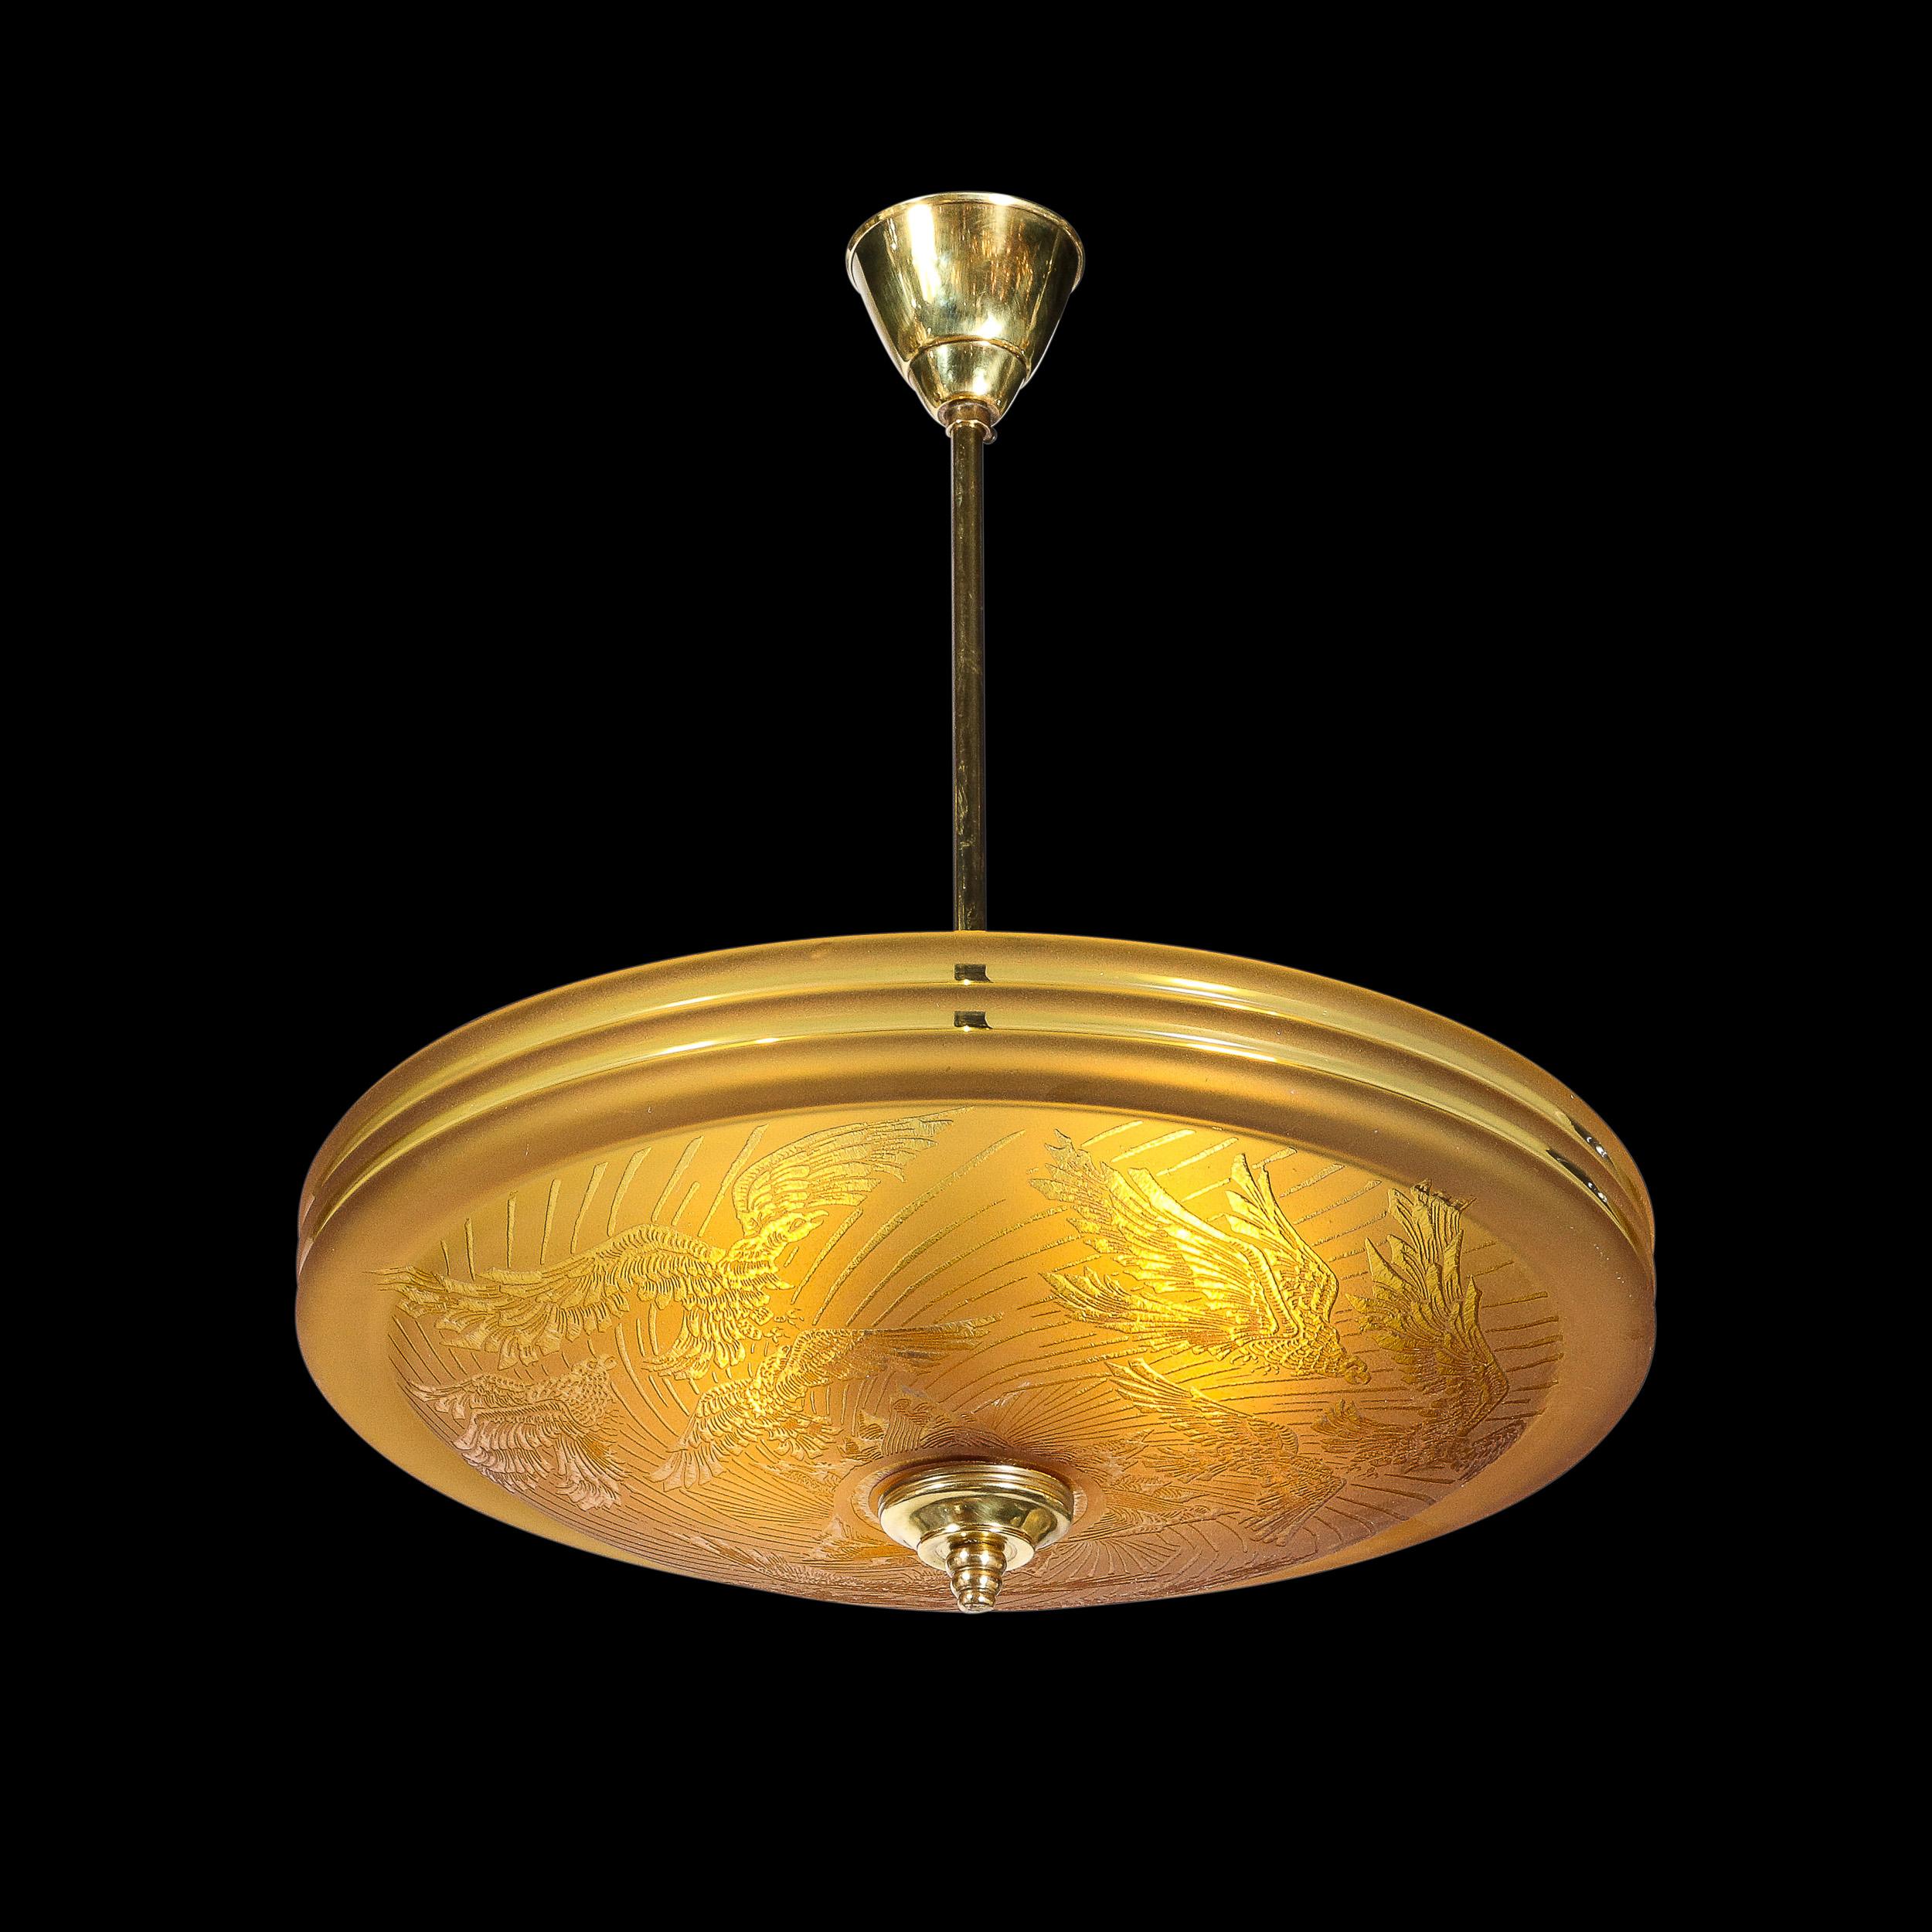 This striking Art Deco Pendant Chandelier with Acid Etched Detailing and bird Motifs is created by the company Deveau and originates from France, Circa 1925. In a single piece of beautiful Amber hued glass, a frosted glass finish is applied across